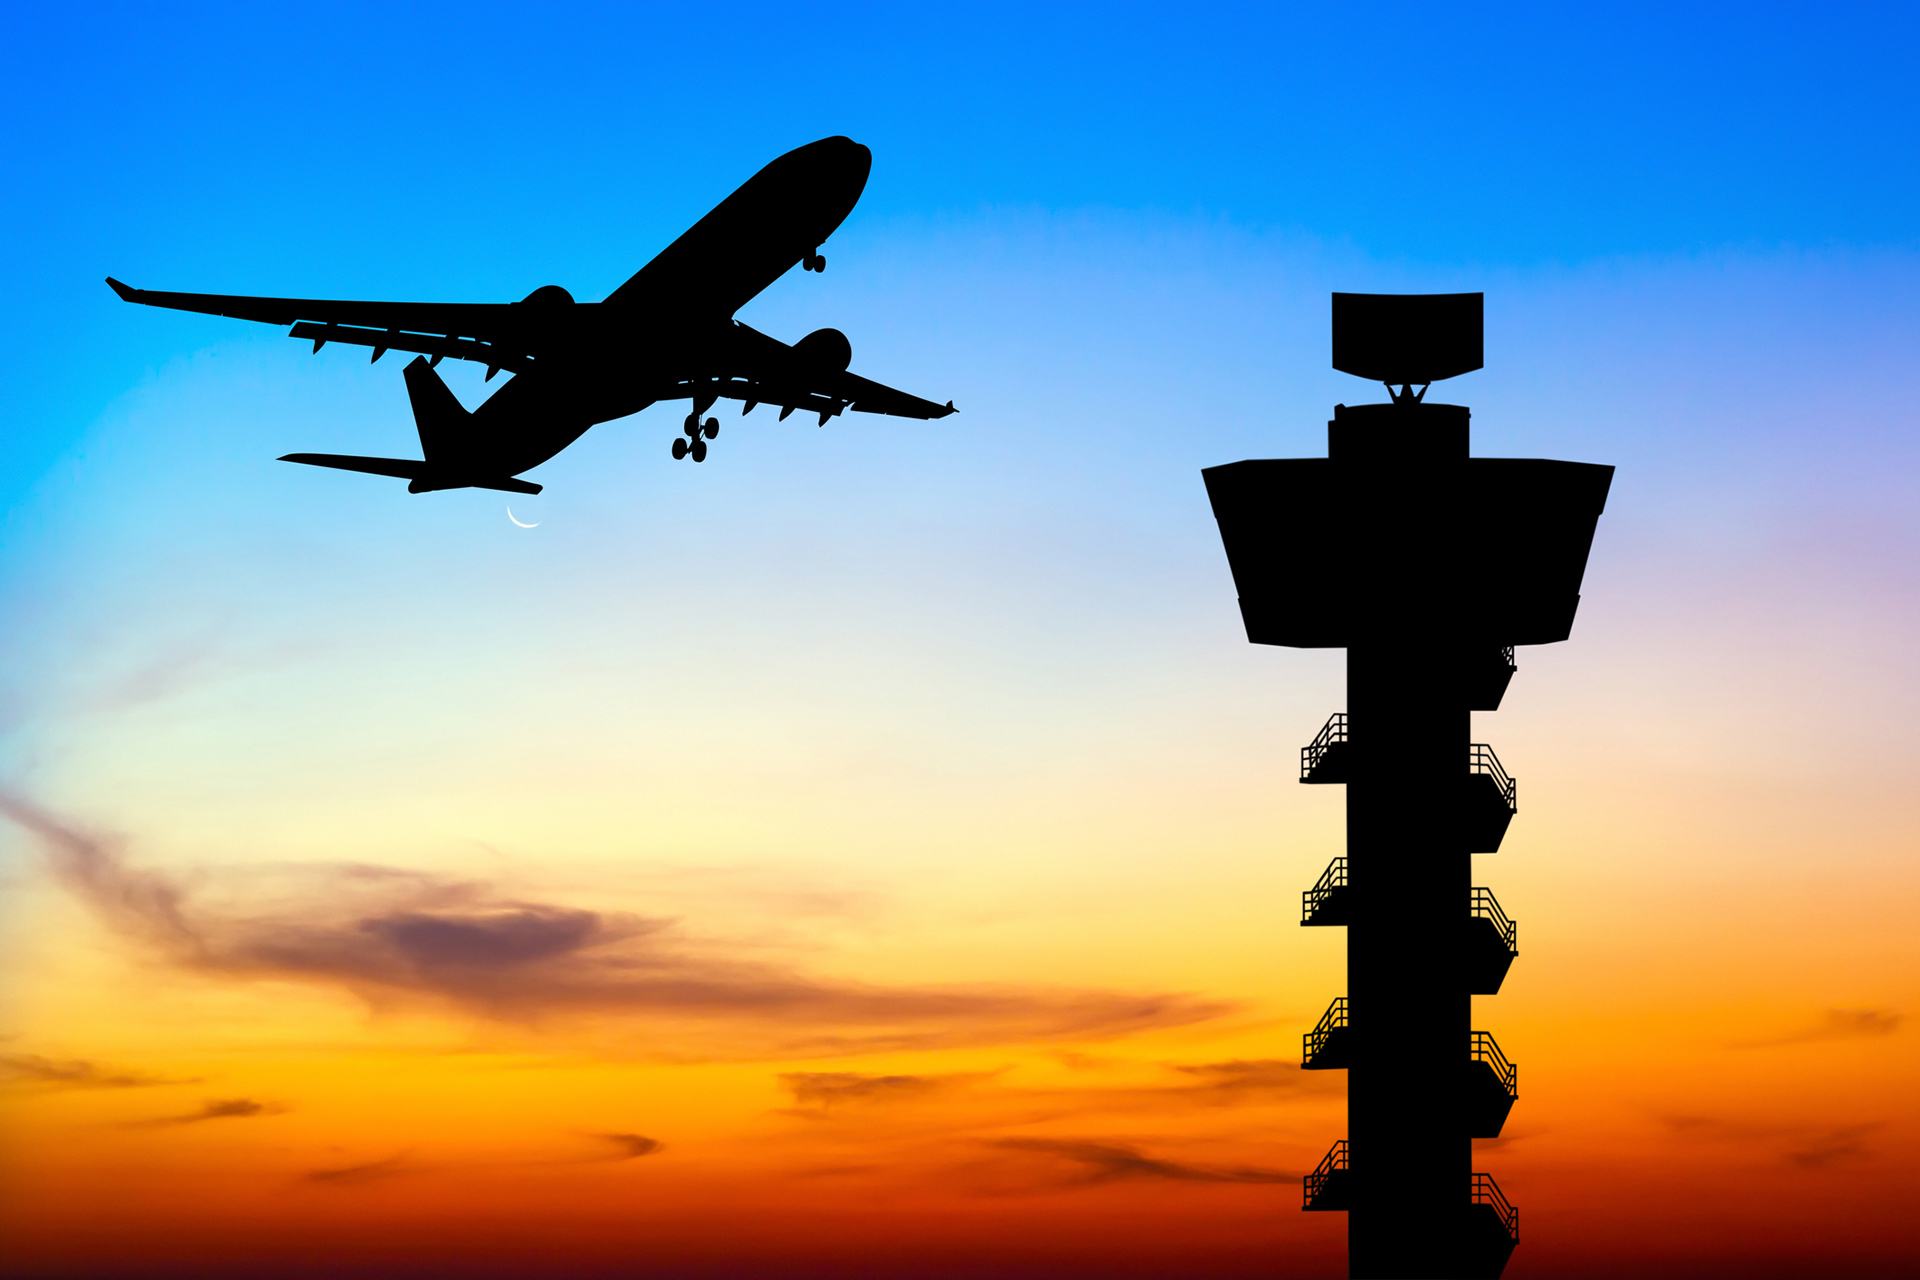 Act now for full digital transformation of air traffic control